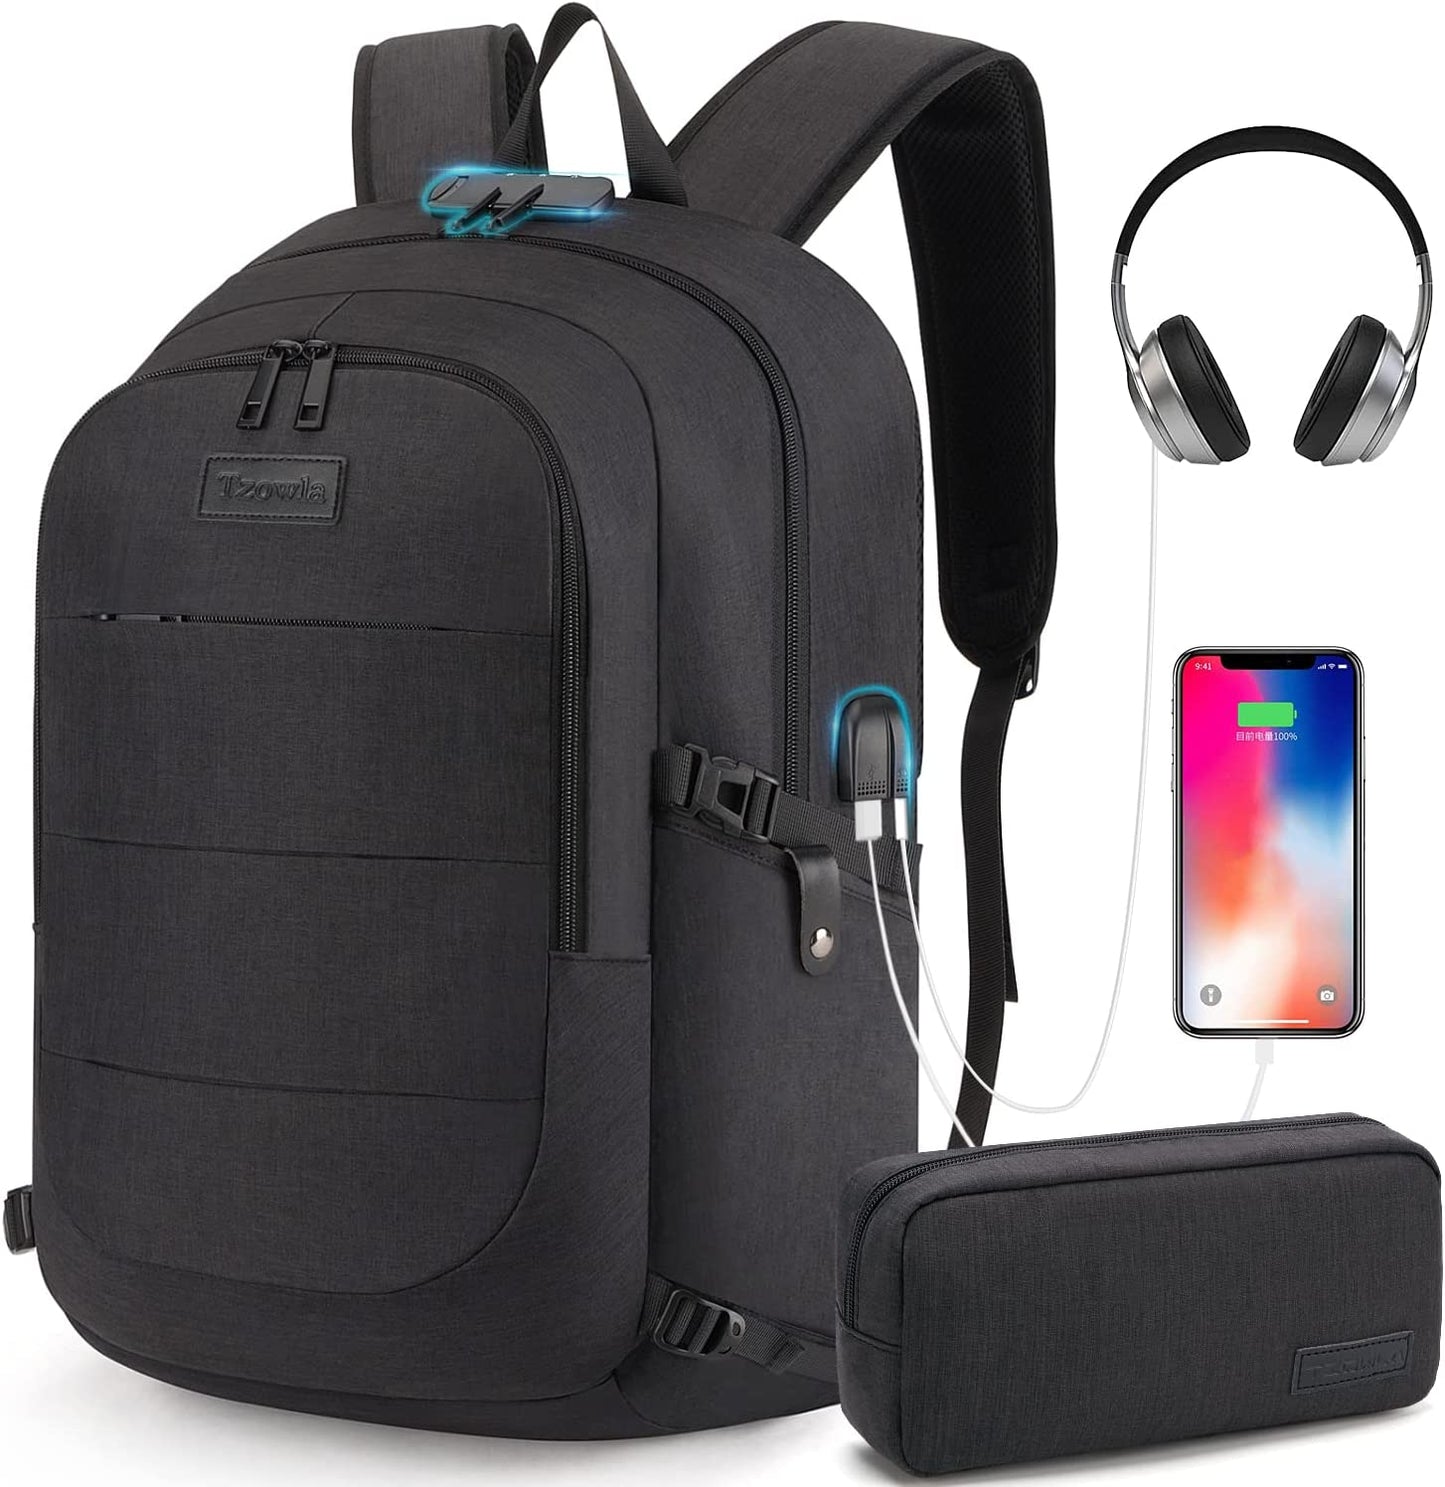 Anti-Theft, Water-Resistant, Modern Laptop Backpack: Adventure-Ready | Built-in USB Charging Port